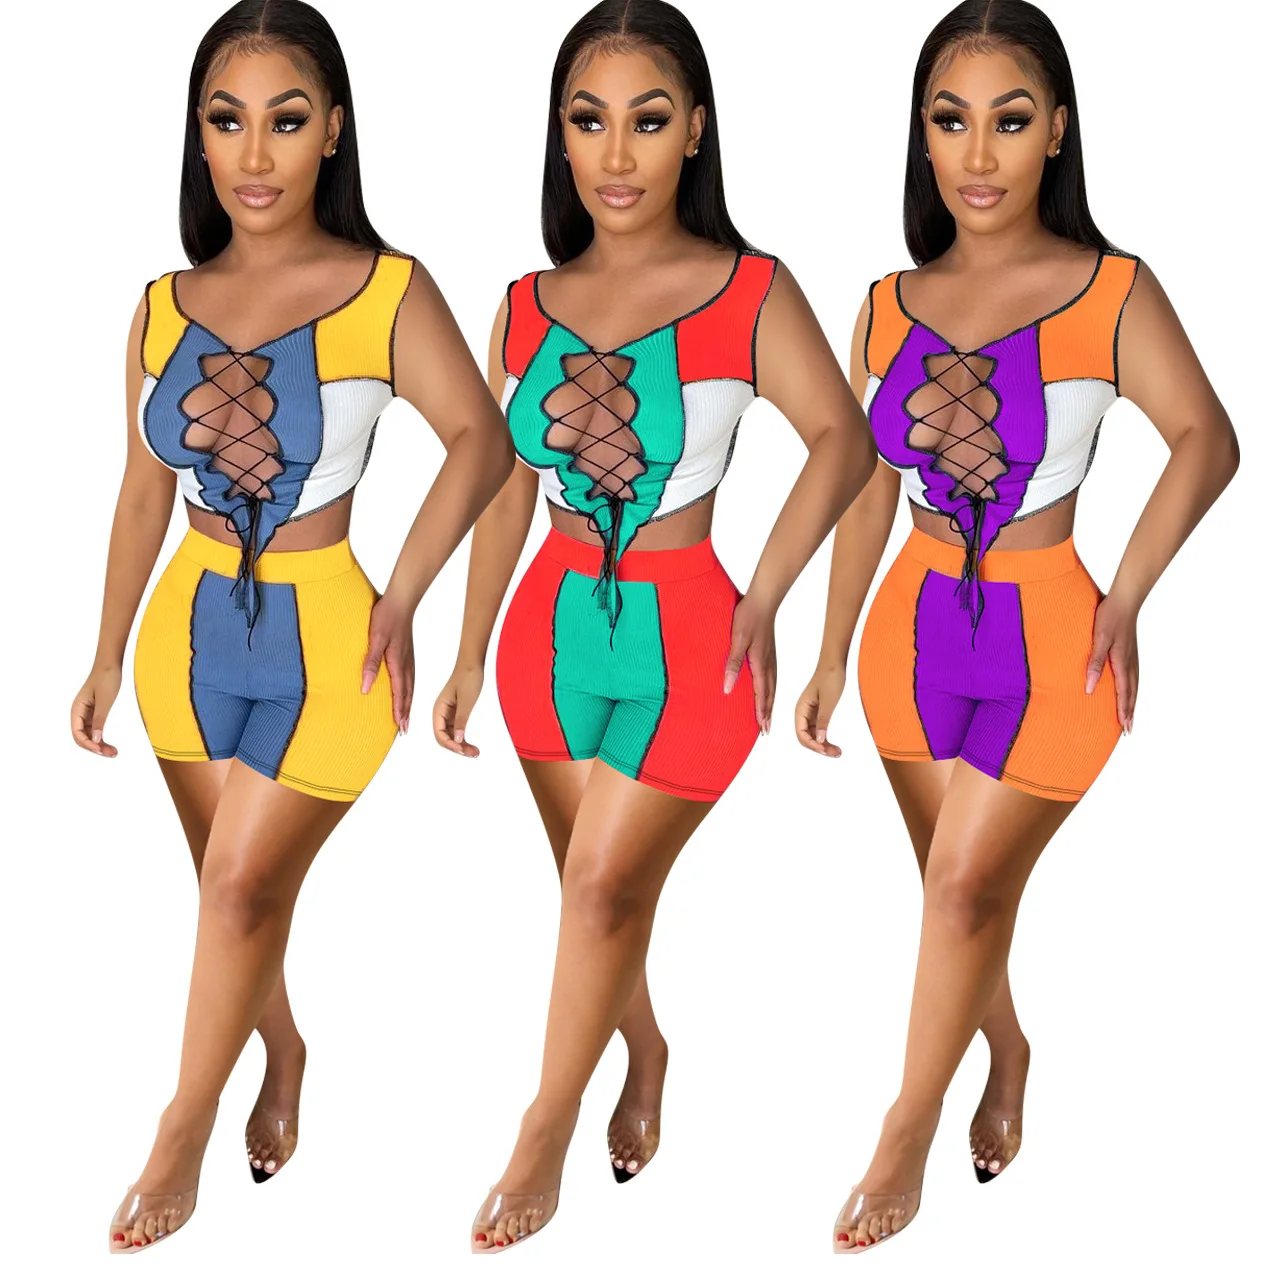 

New Trendy Woman Bodycon Jogger Biker Boutique Clothing 2021 Women Two Piece Matching Short Set Summer Outfit 2 Piece